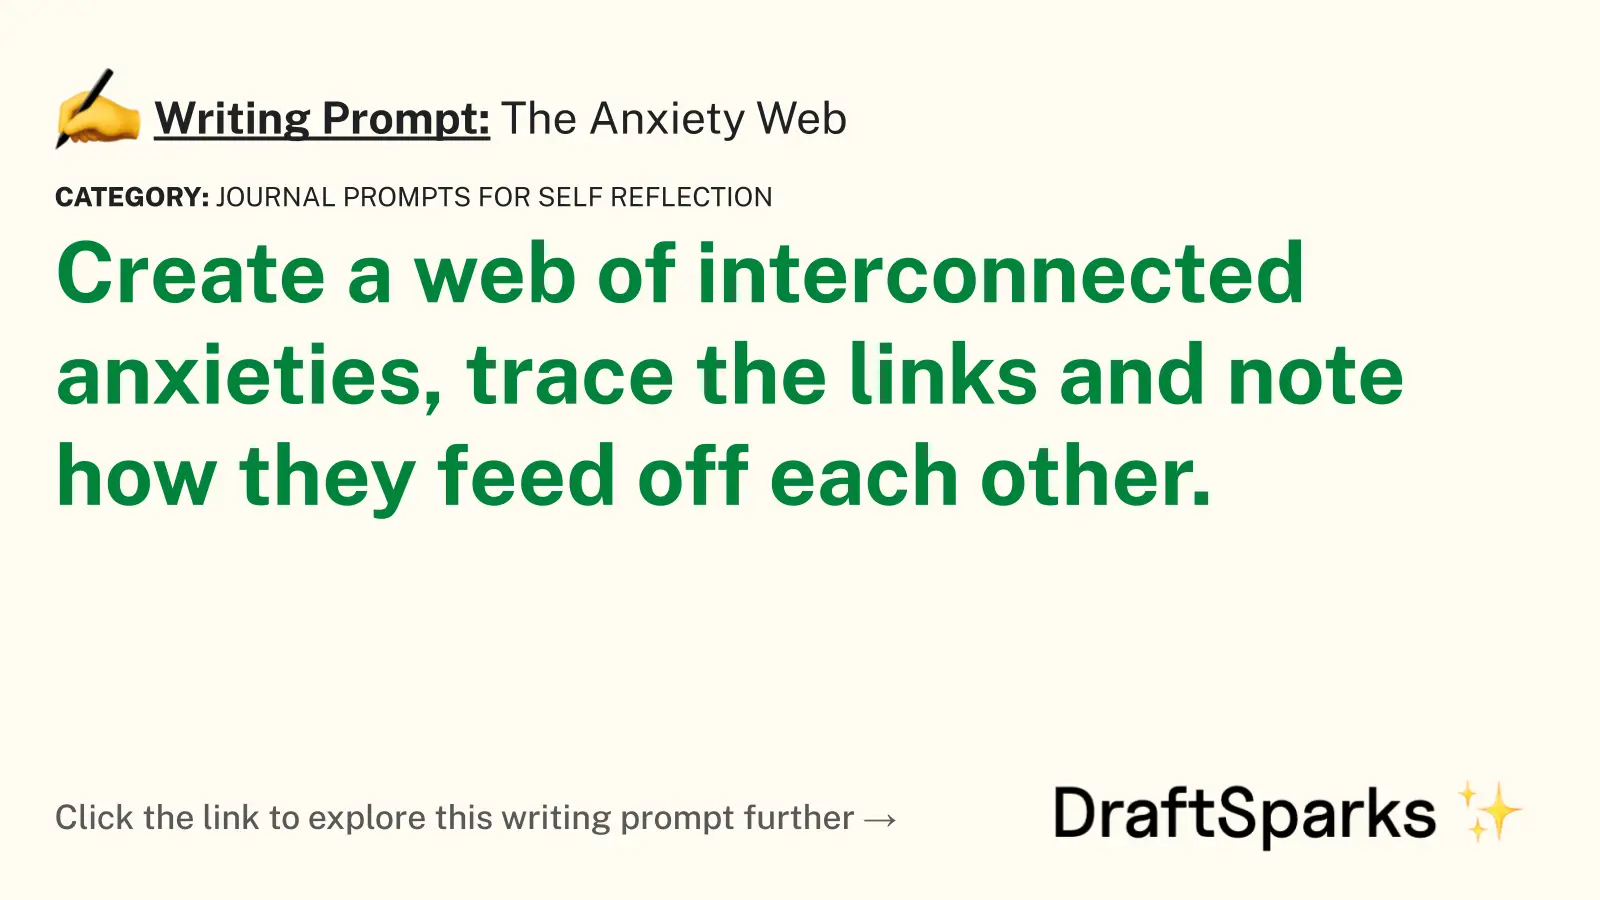 The Anxiety Web